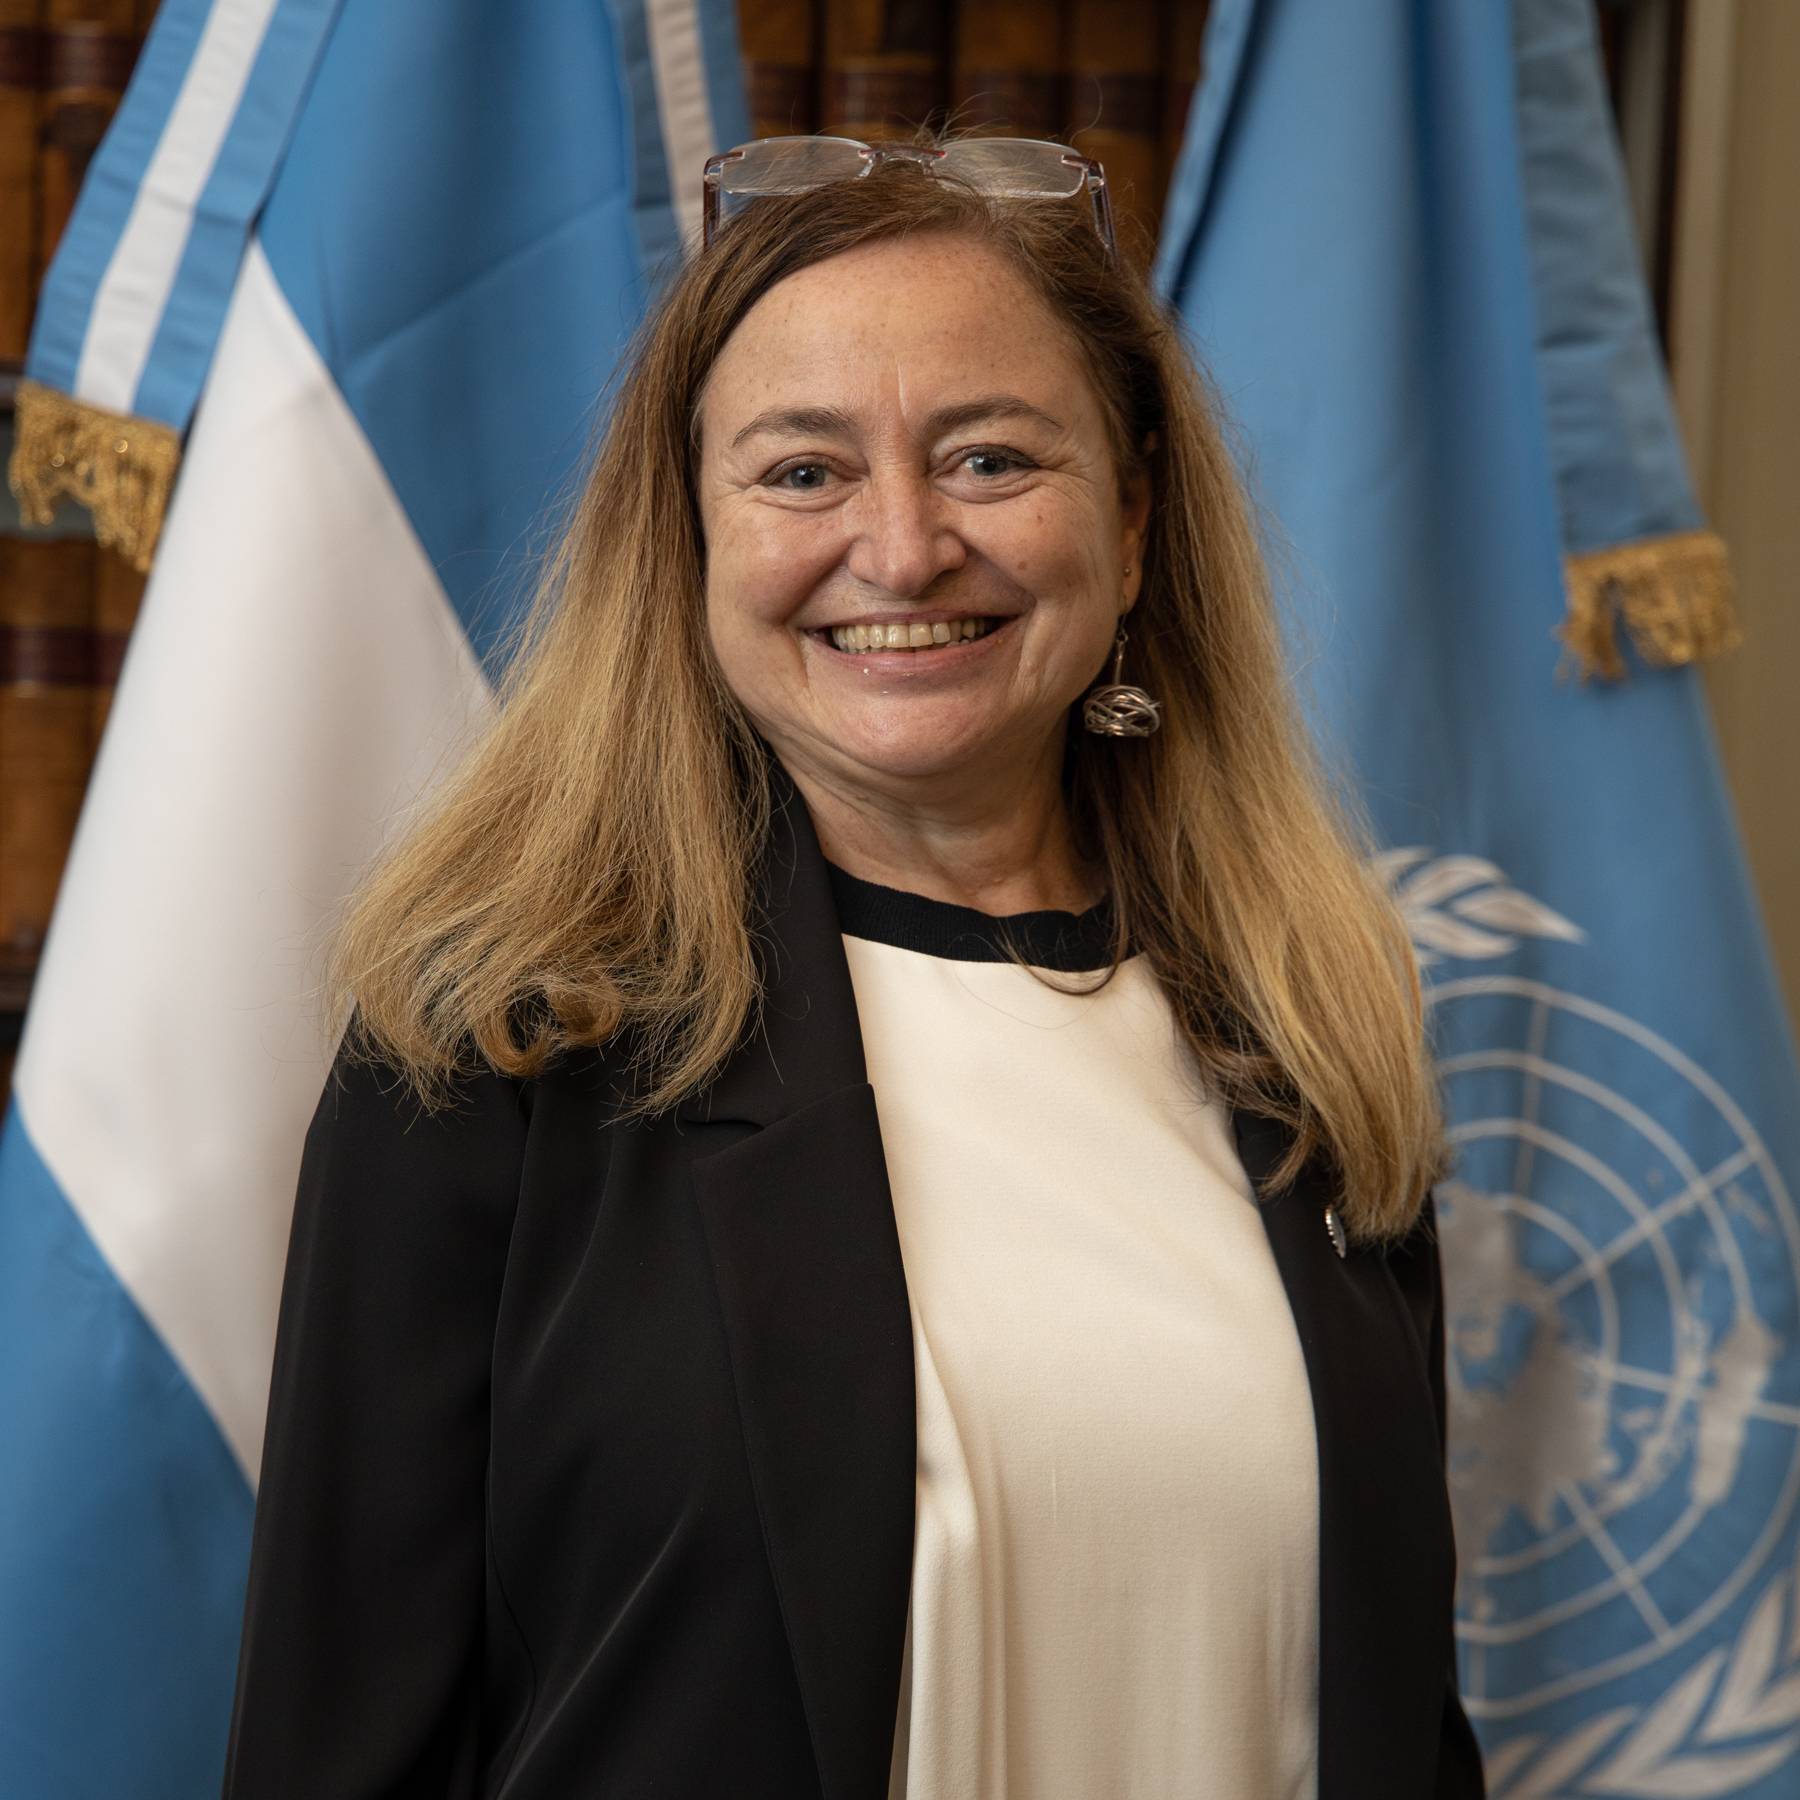 A woman in a black jacket and white shirt smiles brightly at the camera next to the United Nations and Argentinian flags.